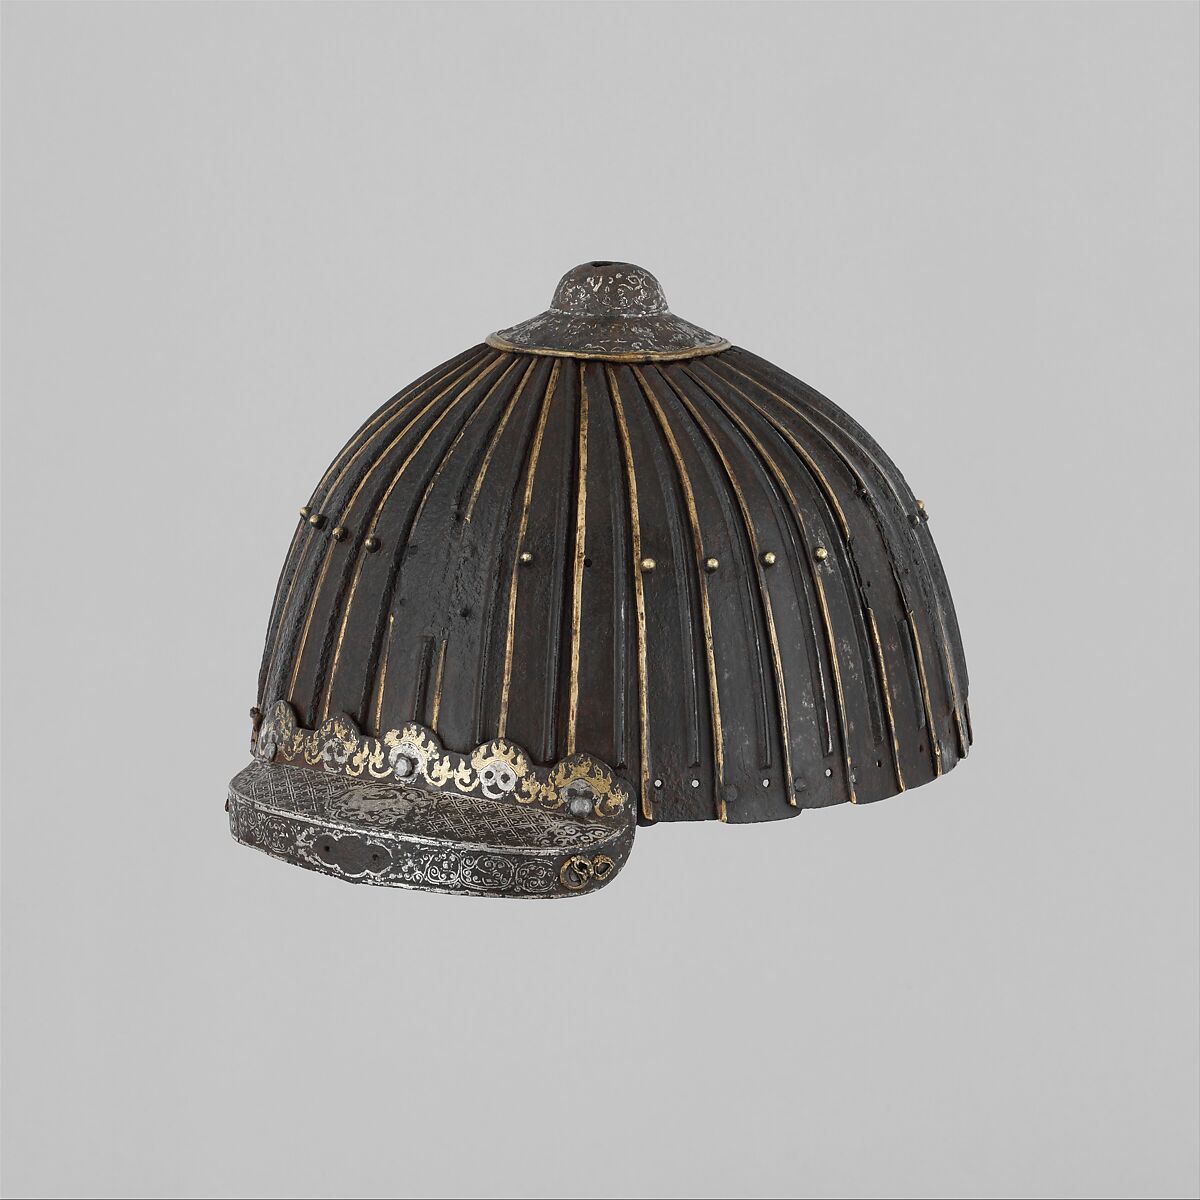 Multi-Plate Helmet of Thirty-Two Lames, Iron, silver, gold, brass or copper alloy, Mongolian or Tibetan 